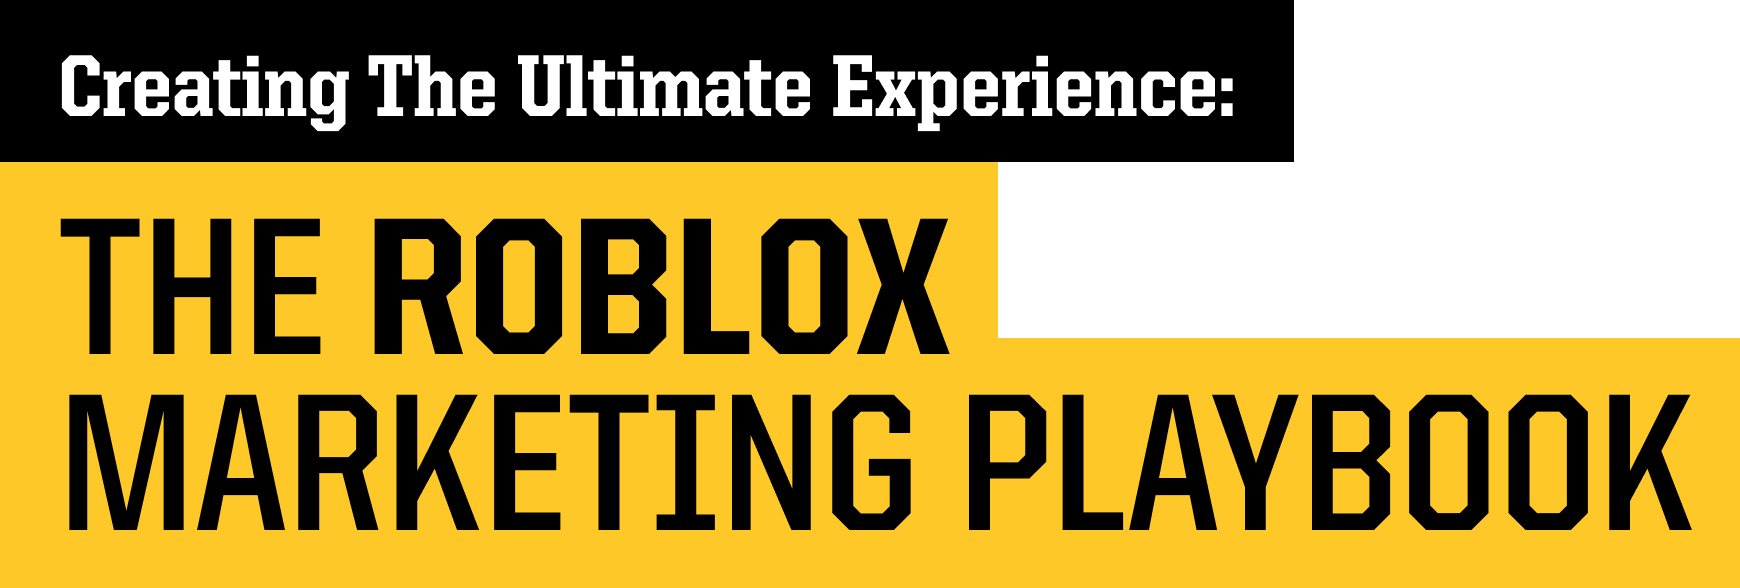 Creating The Ultimate Experience The Roblox Marketing Playbook